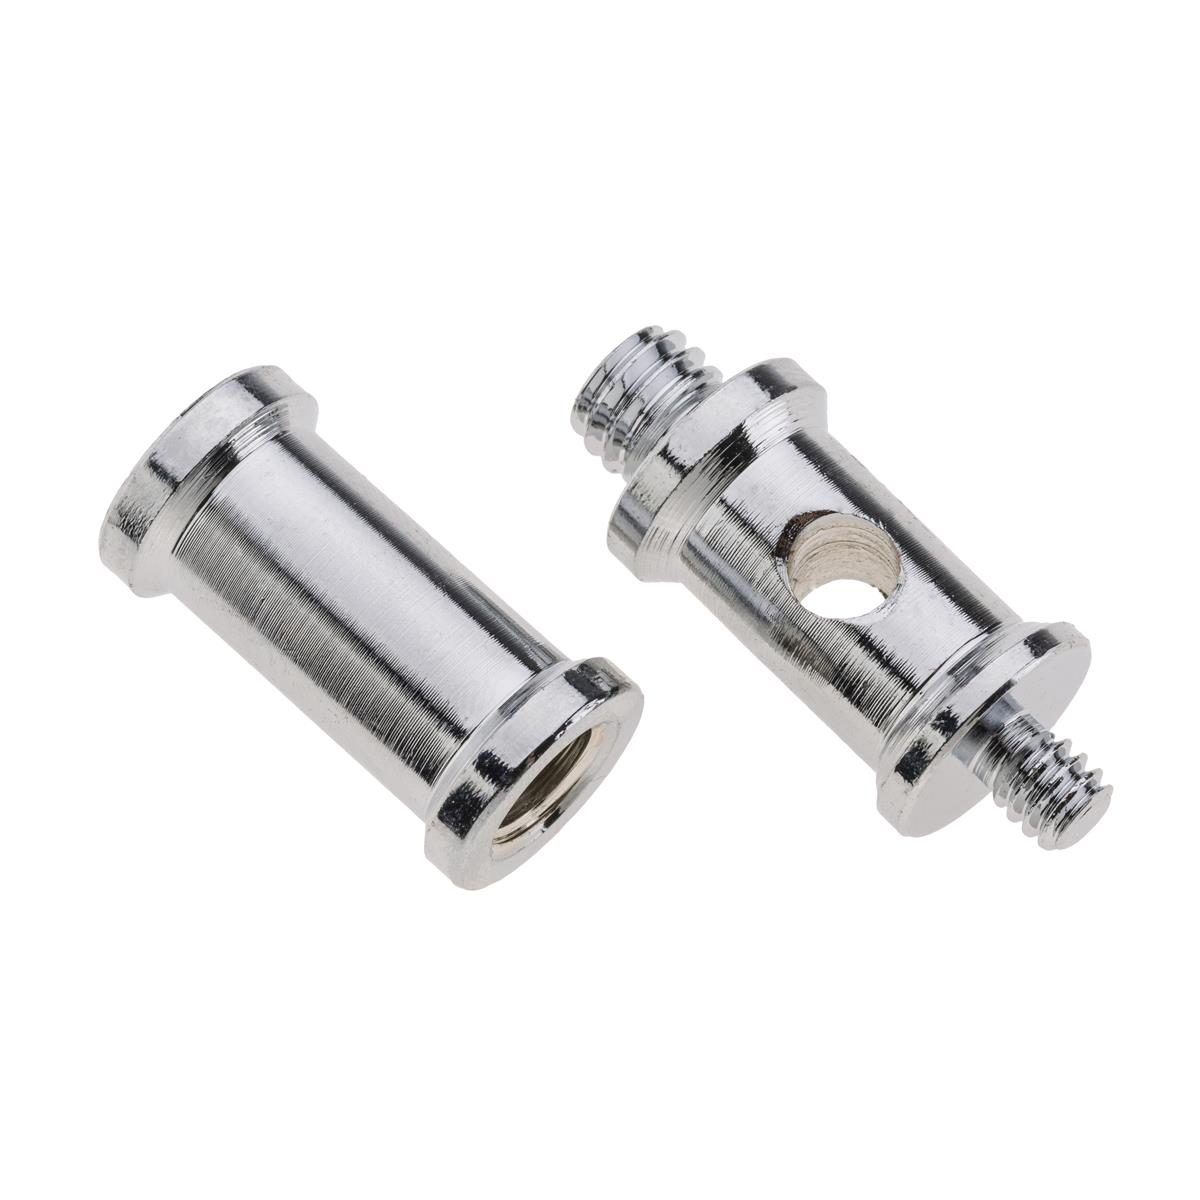 Image of Flashpoint Stud Adapter Set Female &amp; Male 1/4&quot; &amp; 3/8&quot; Stud